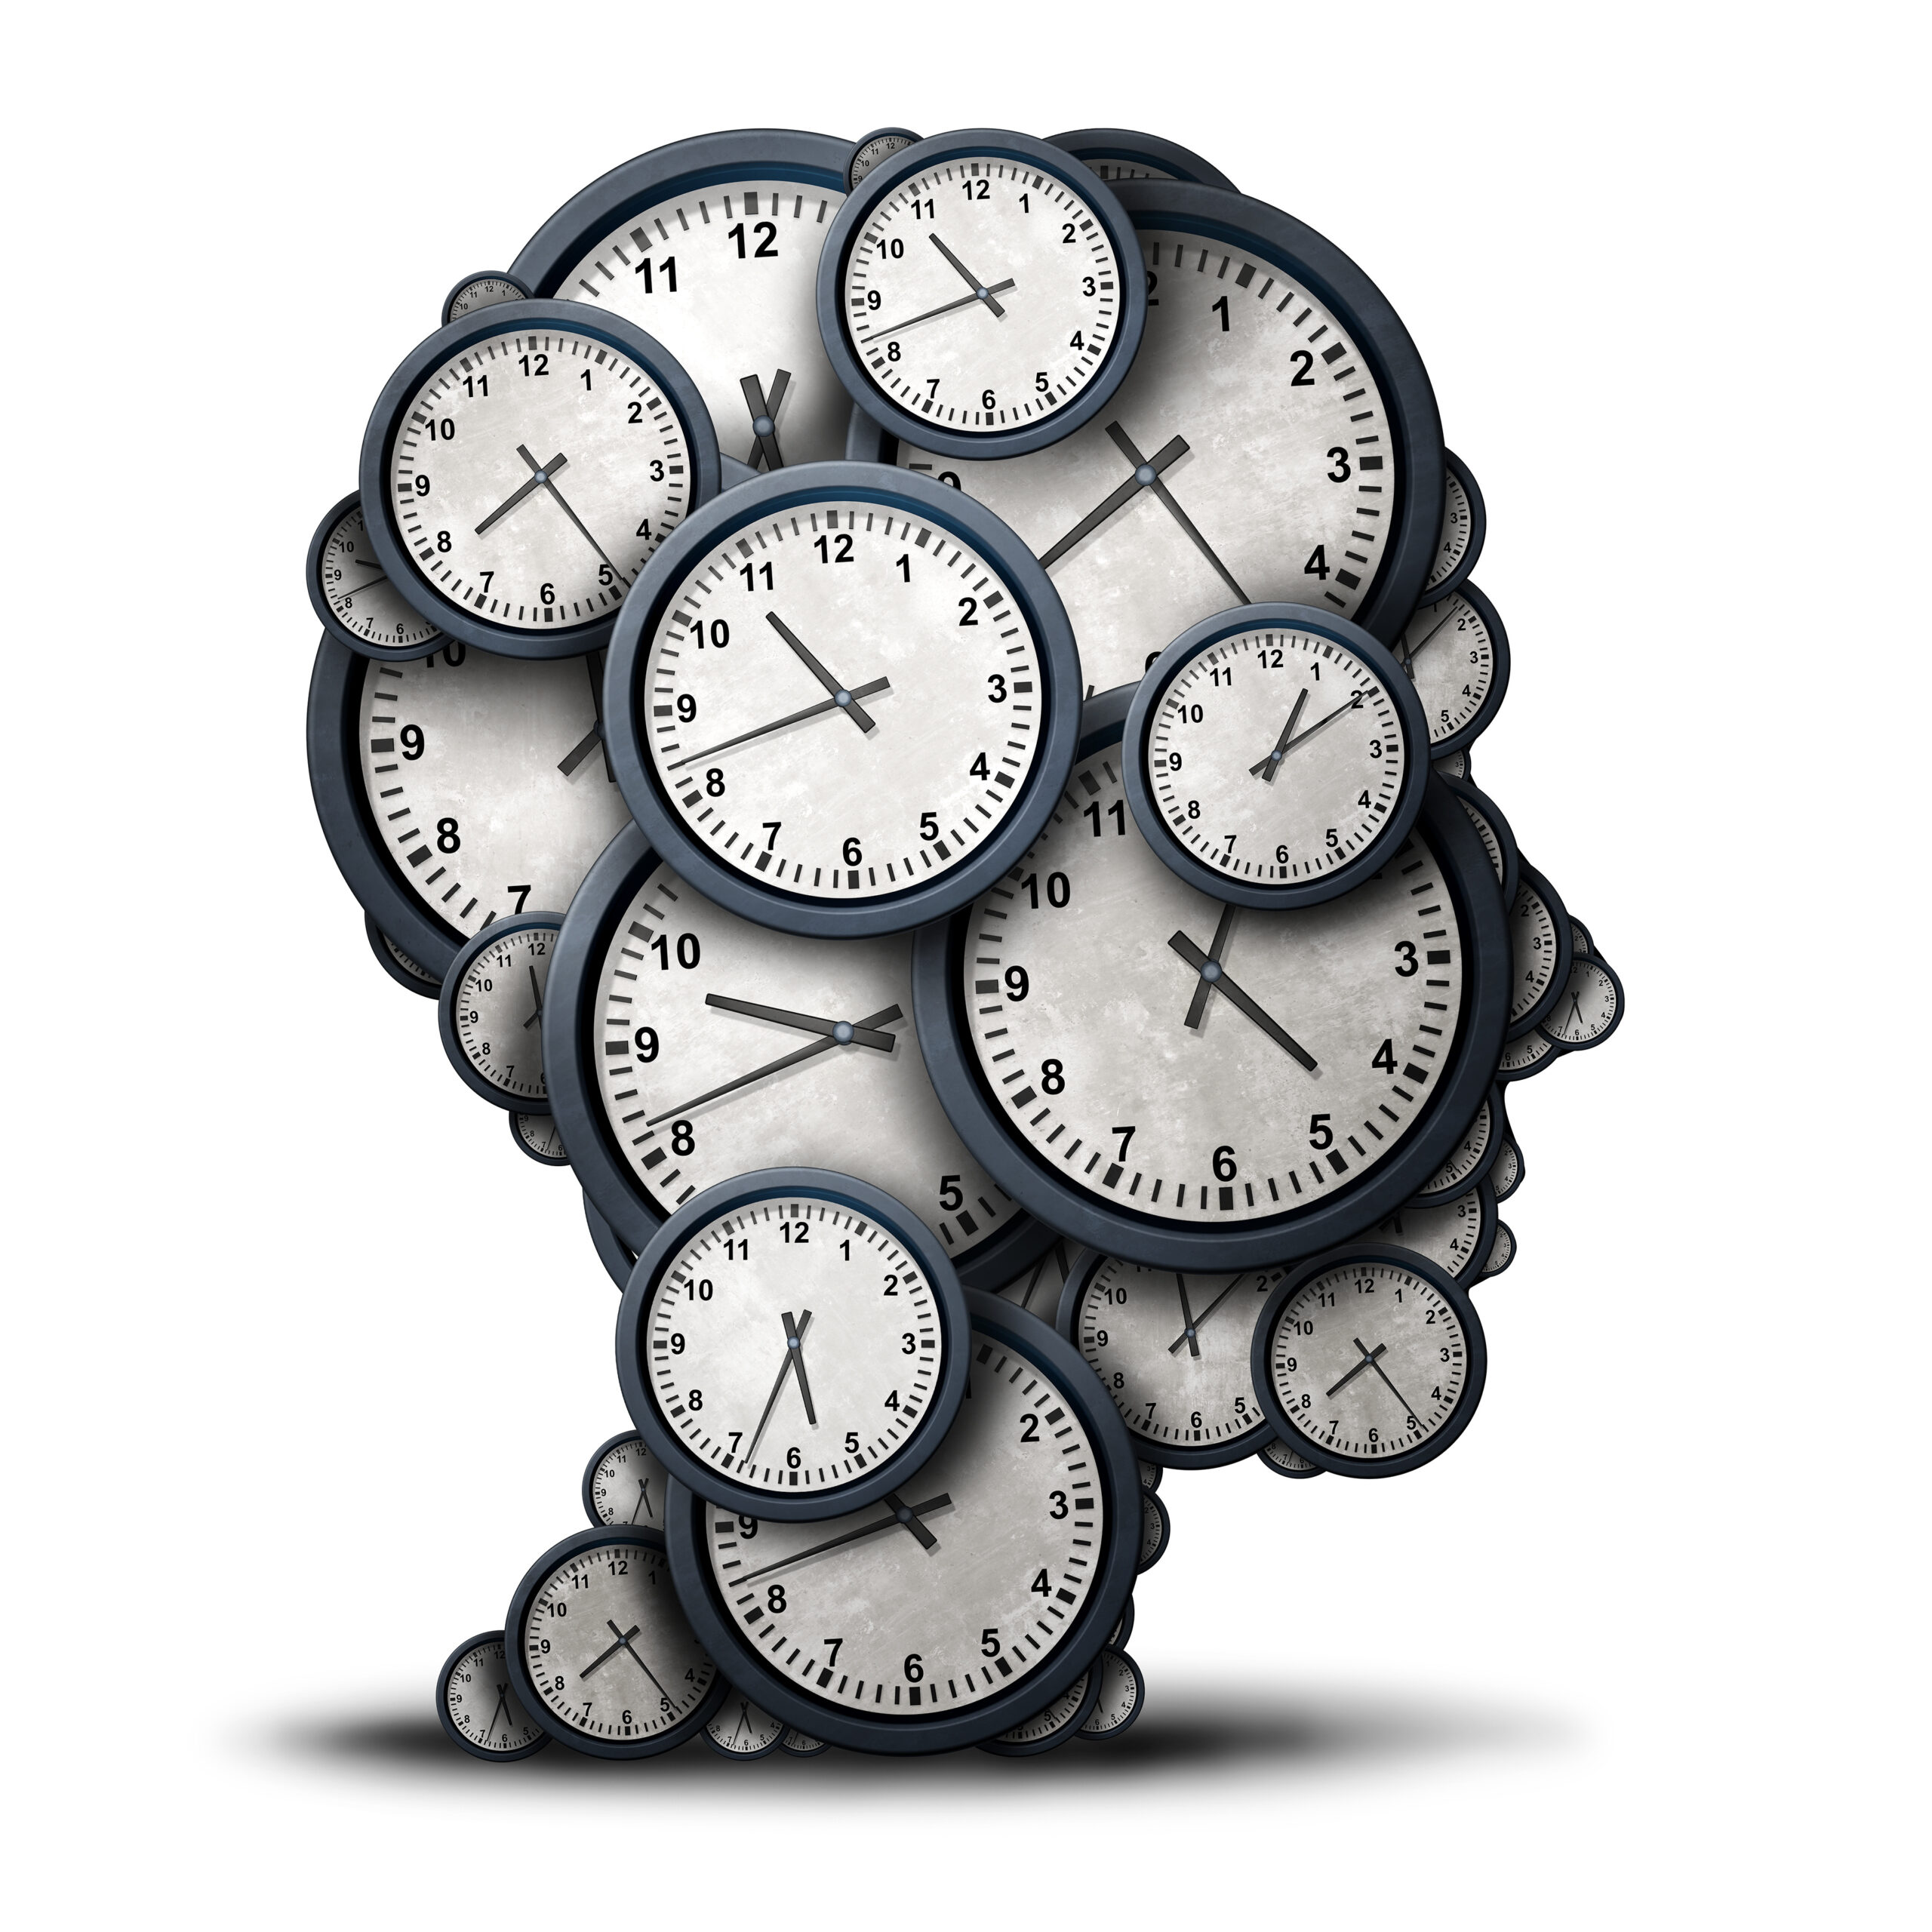 Brain Aging May Explain Why Time Seems To Fly By Quicker